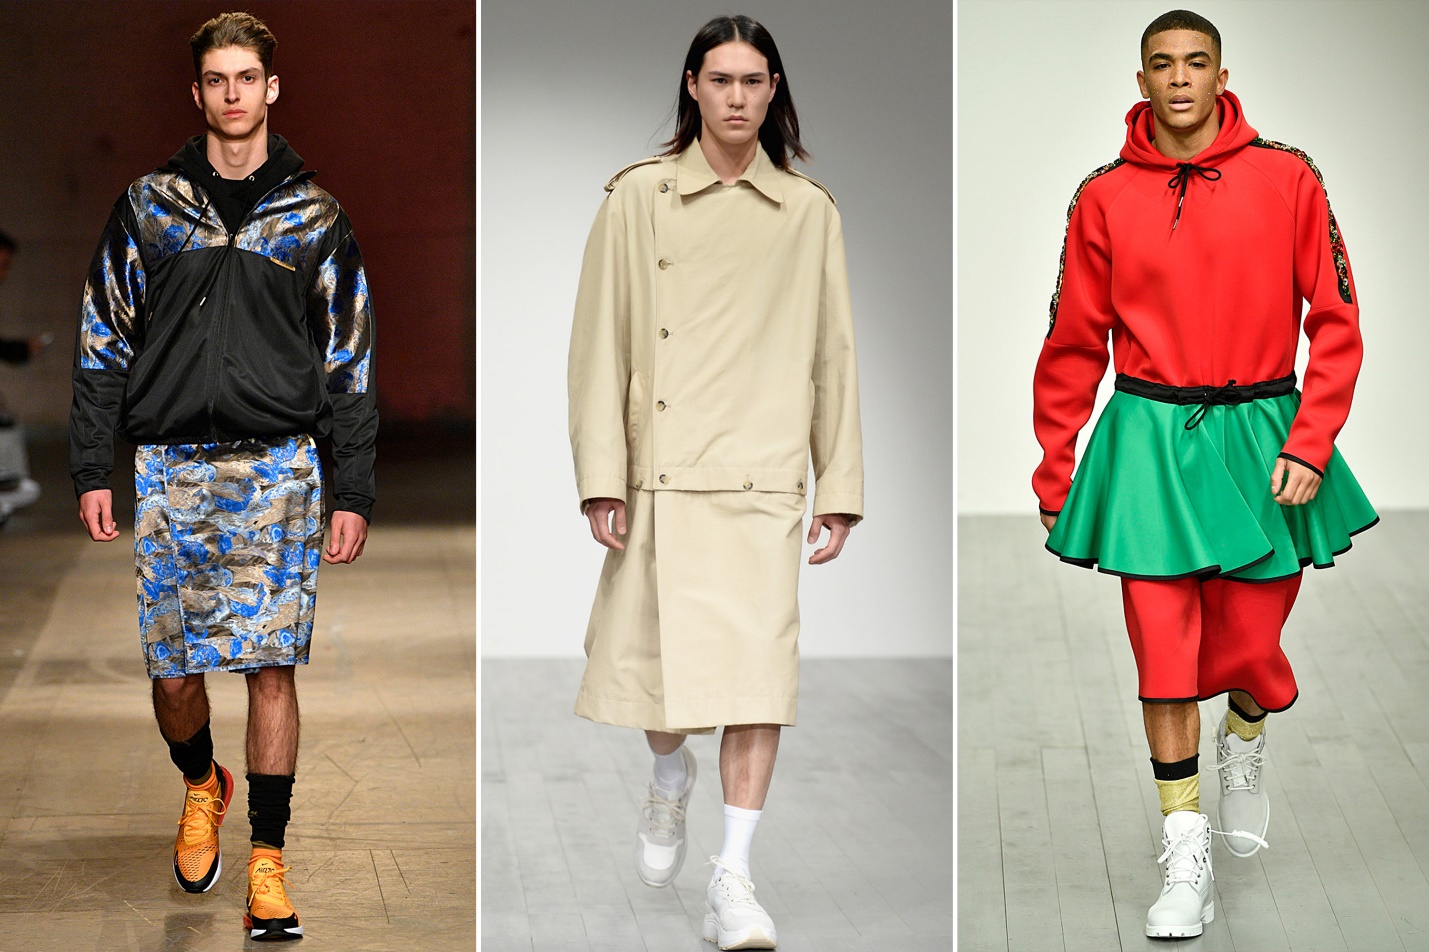 Are skirts the next men's fashion trend?